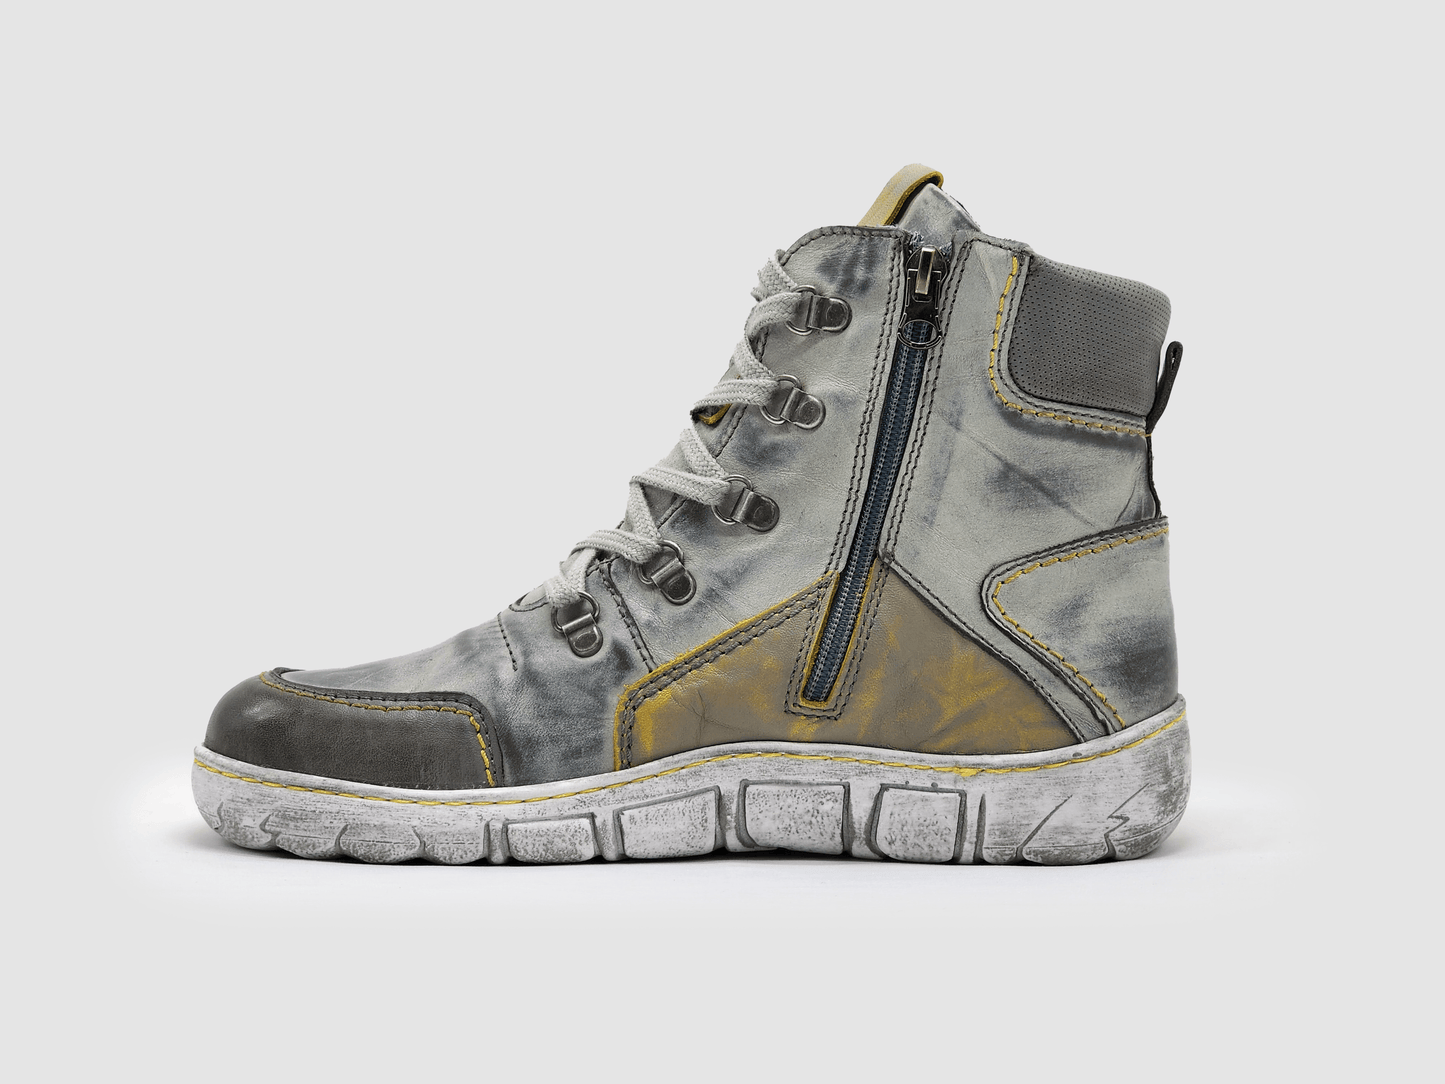 Women's Original Insulated Zip-Up Leather Boots - Grey & Yellow - Kacper Global Shoes 